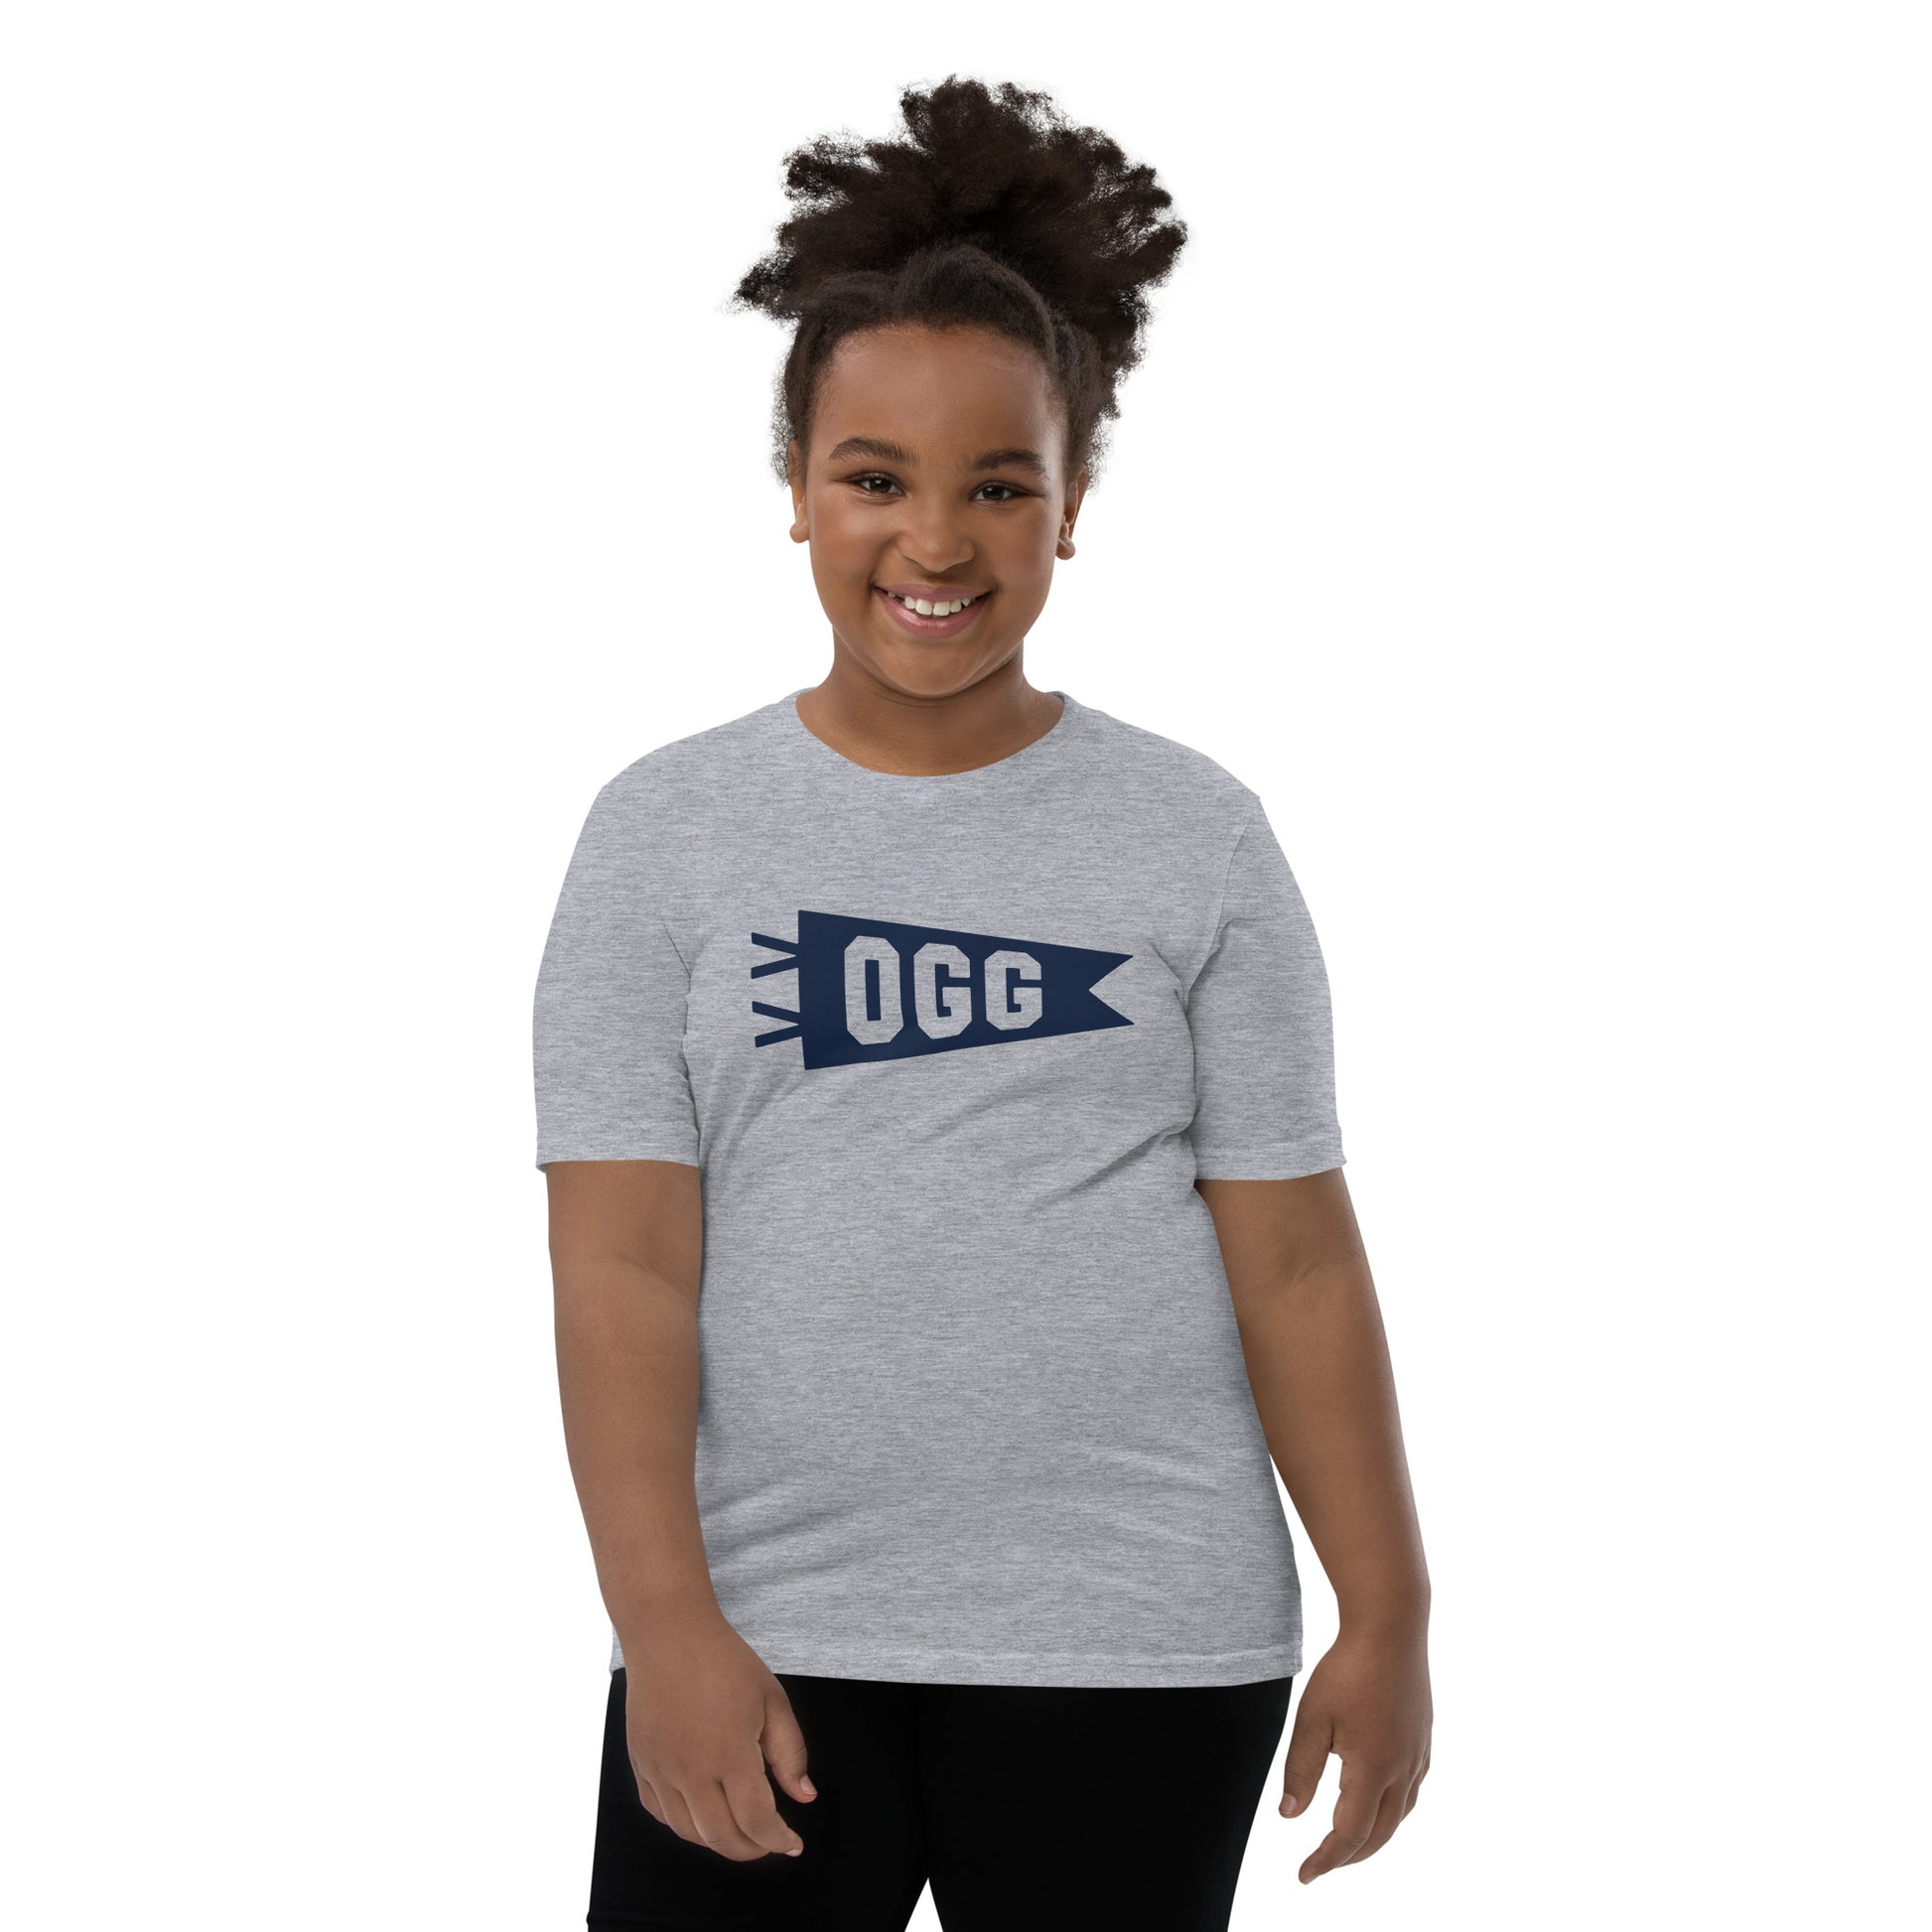 Kid's Airport Code Tee - Navy Blue Graphic • OGG Maui • YHM Designs - Image 05